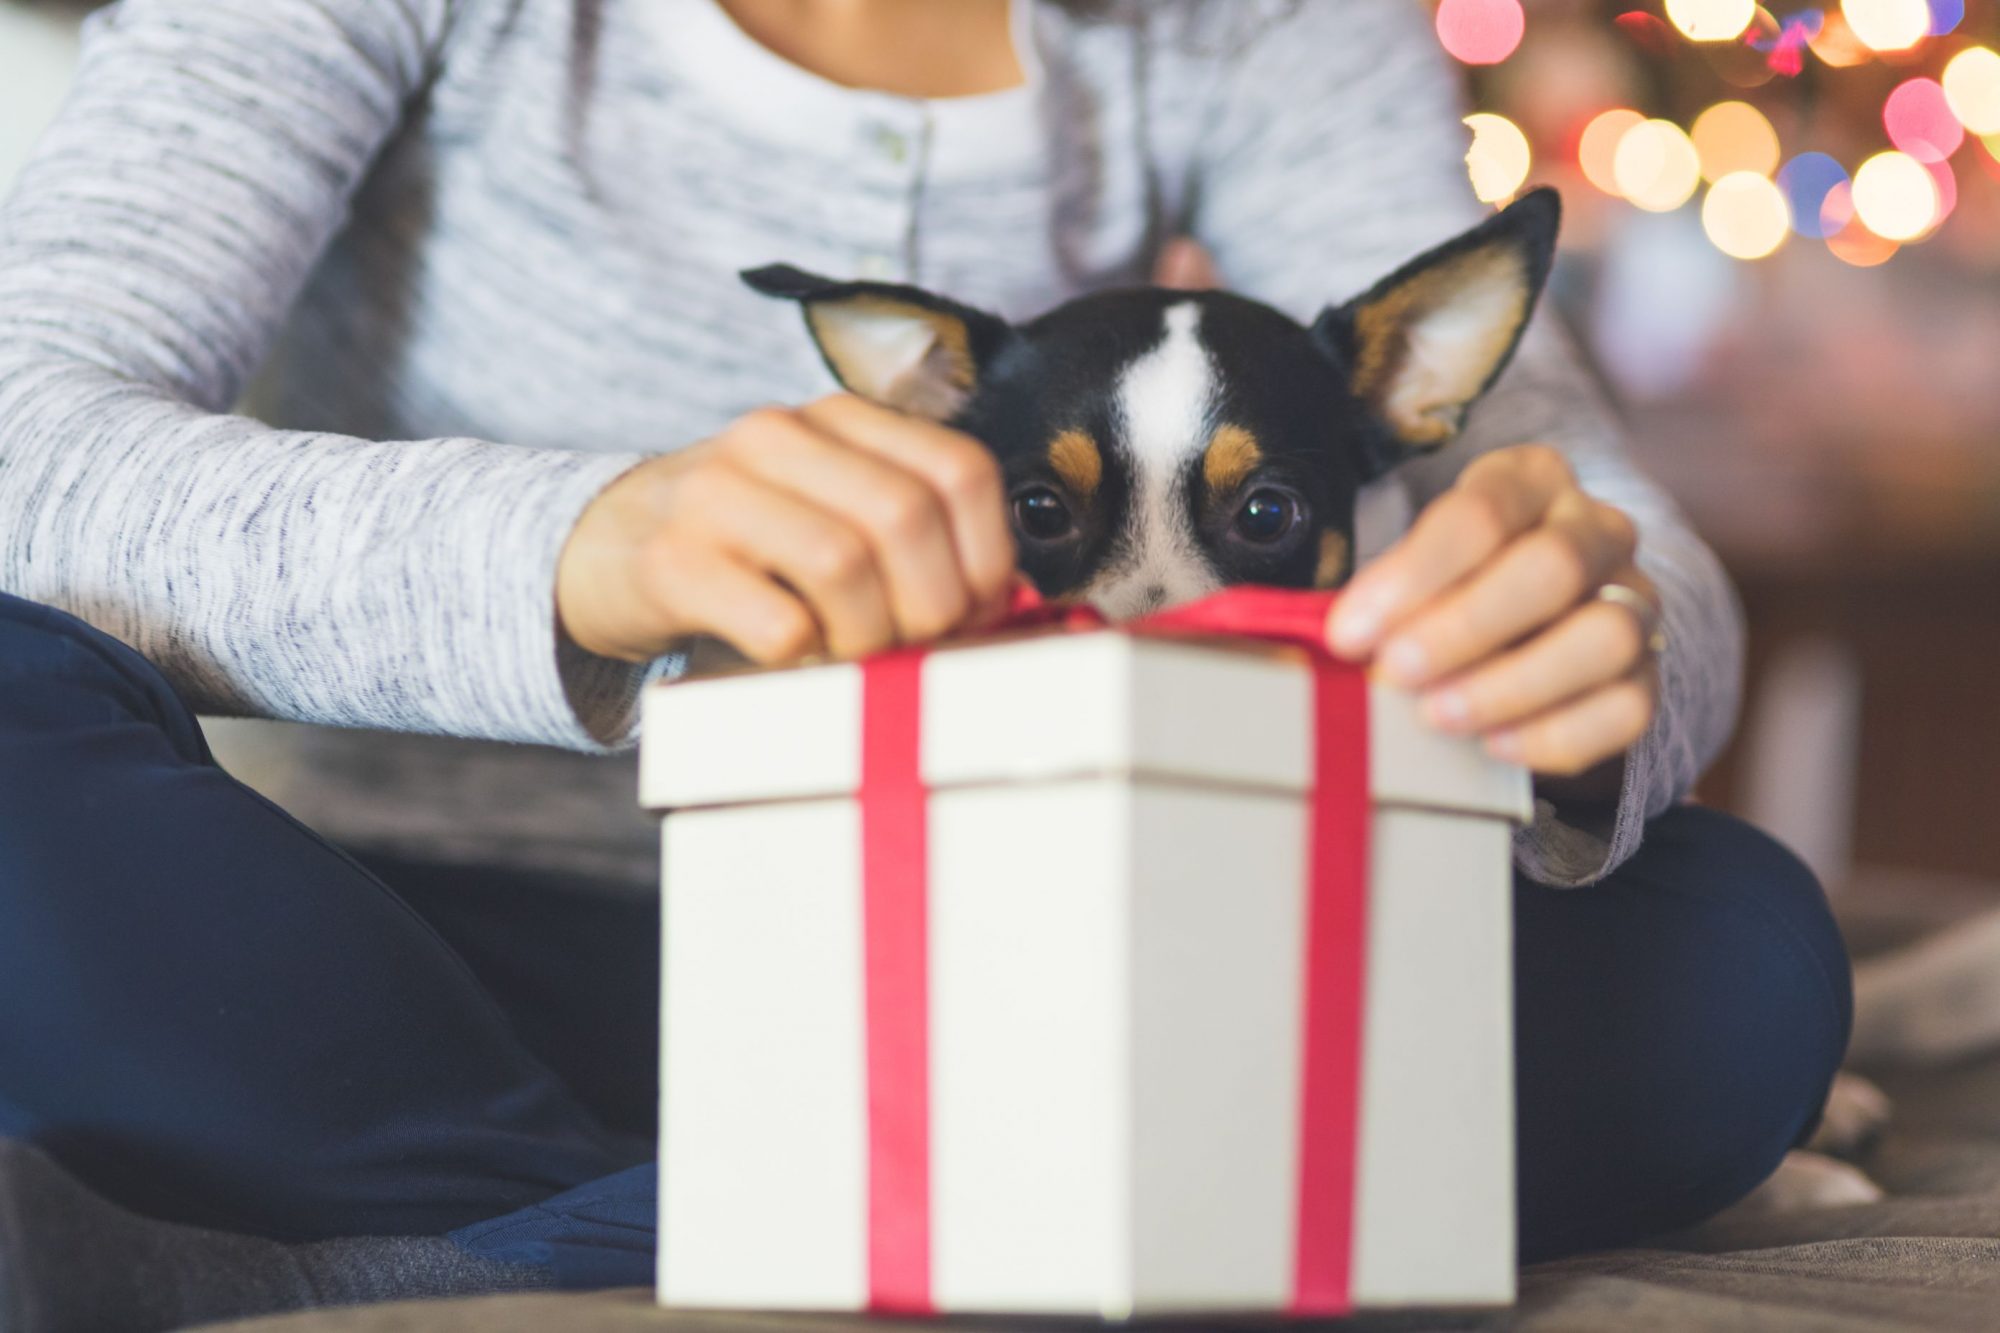 Lady opening a present for her dog.